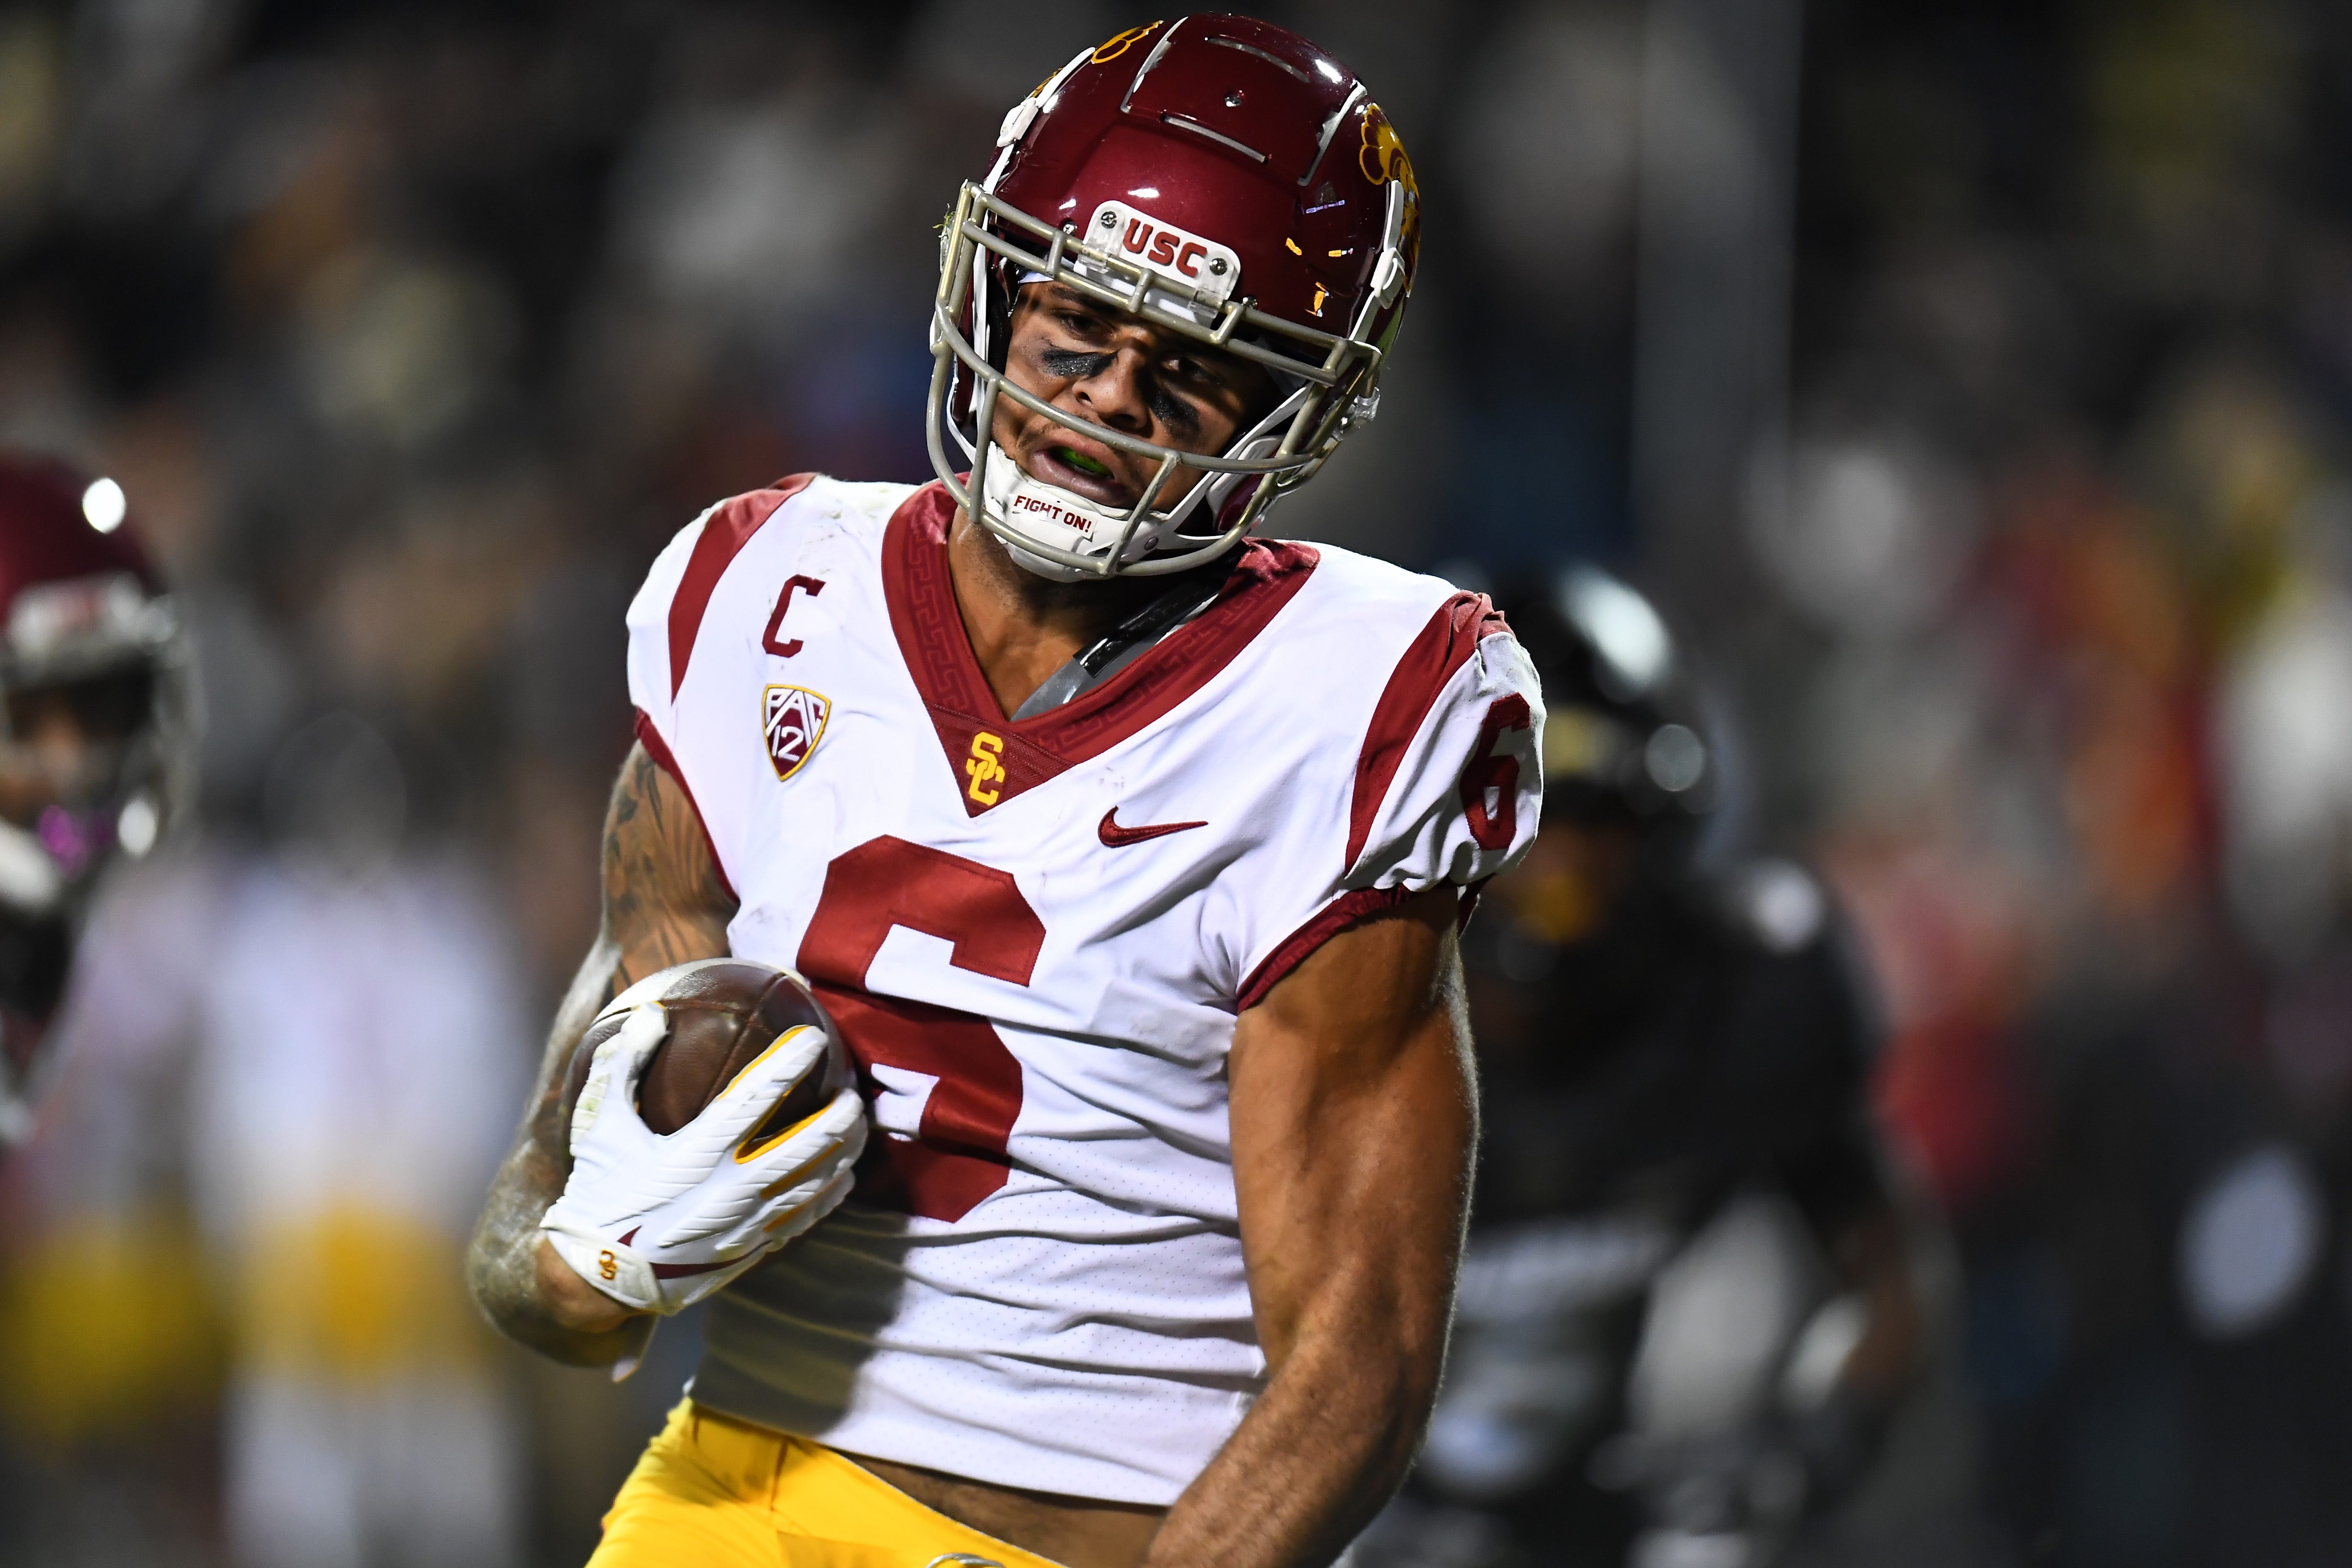 Michael Pittman Jr. finished his USC career in a major way, ranking in 2019 in the top three for the Biletnikoff Award, given annually to the best college receiver in America.